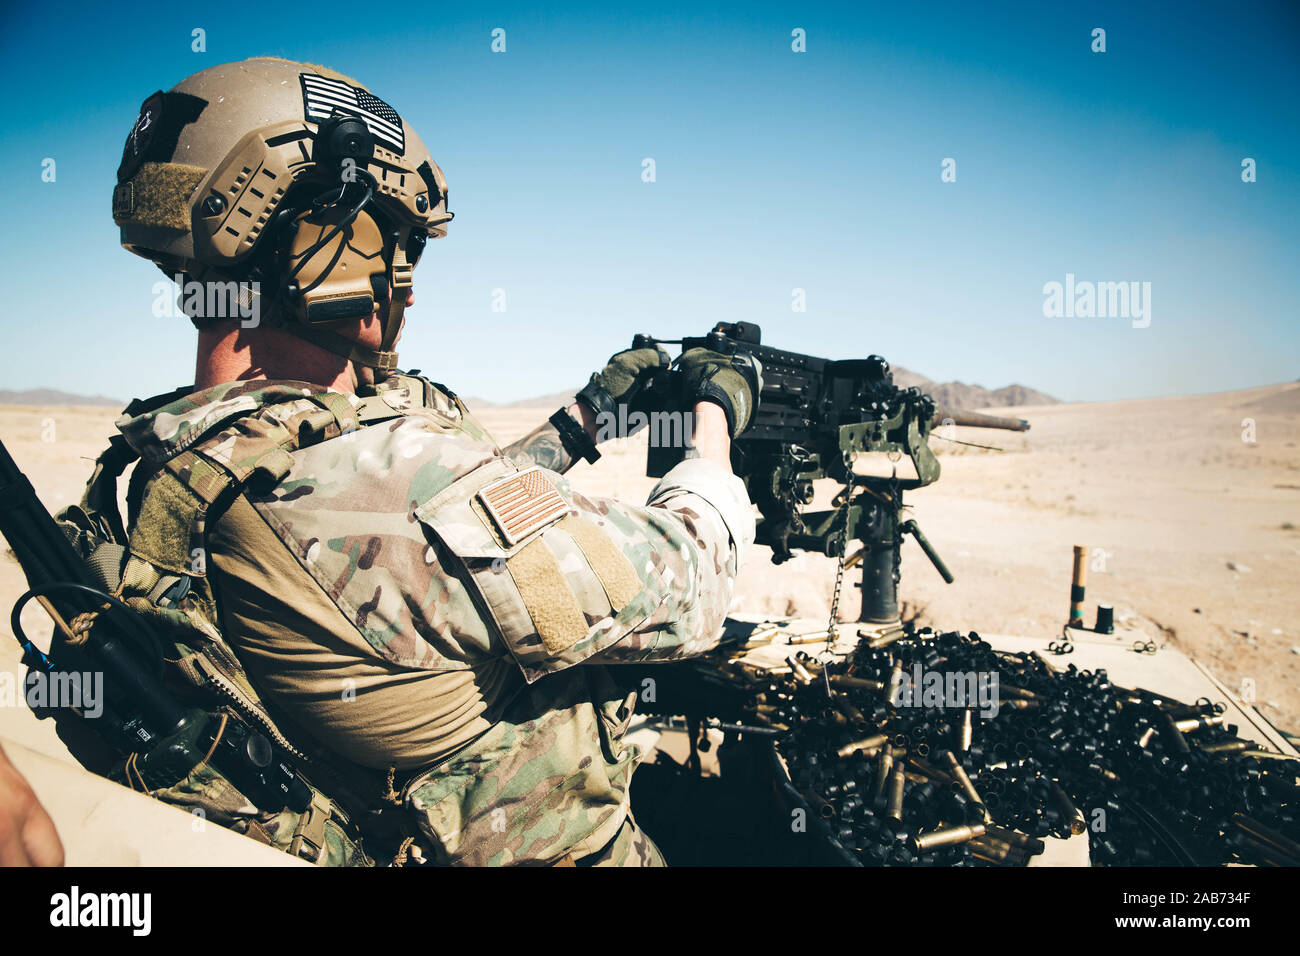 A U.S. Army Special Operations Soldier with 3rd Special Forces Group (Airborne) fires a Browning M2 .50 cal machine gun during at Marine Corps Air Ground Combat Center (MCAGCC), Twentynine Palms, Calif., Oct. 15, 2019. The Green Berets used the MCAGCC training areas to refine detachment tactics and prepare for combat operations. (U.S. Marine Corps photo by Cpl. William Chockey) Stock Photo